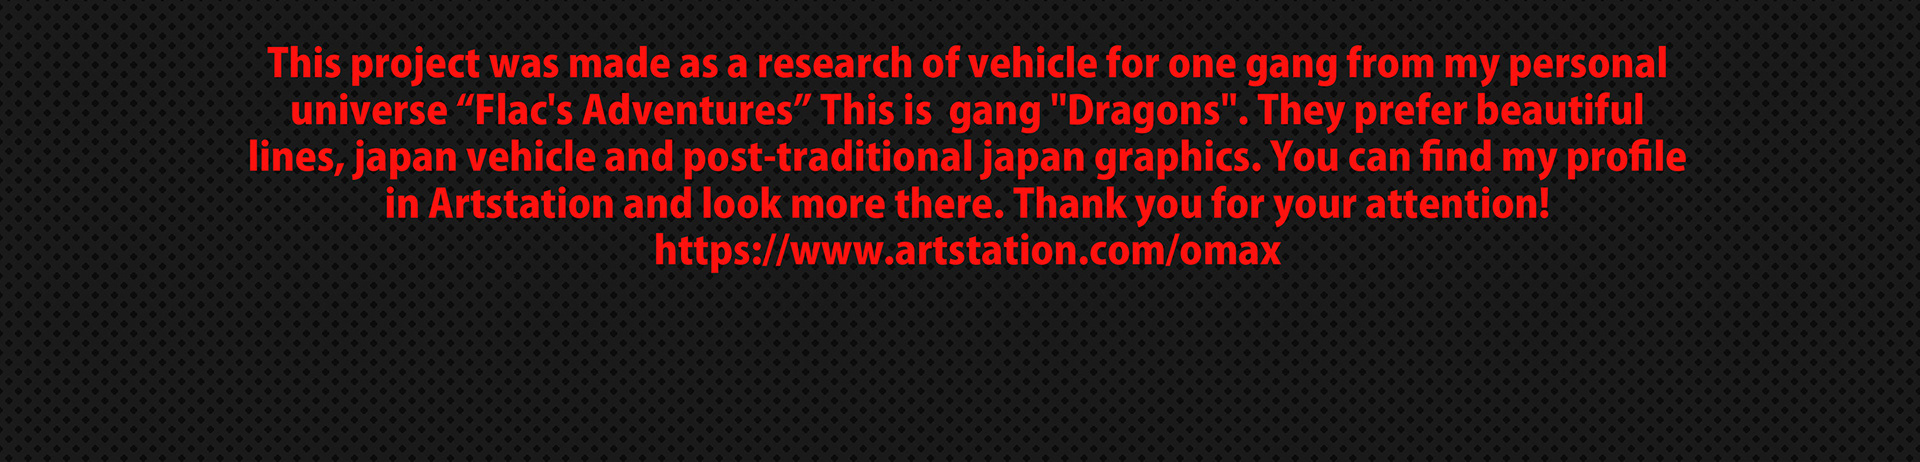 Dragons GANG! (RX-7) + FREE Gumroad Decals on Behance6ce5f274947749.5c4908a9903a7.jpg